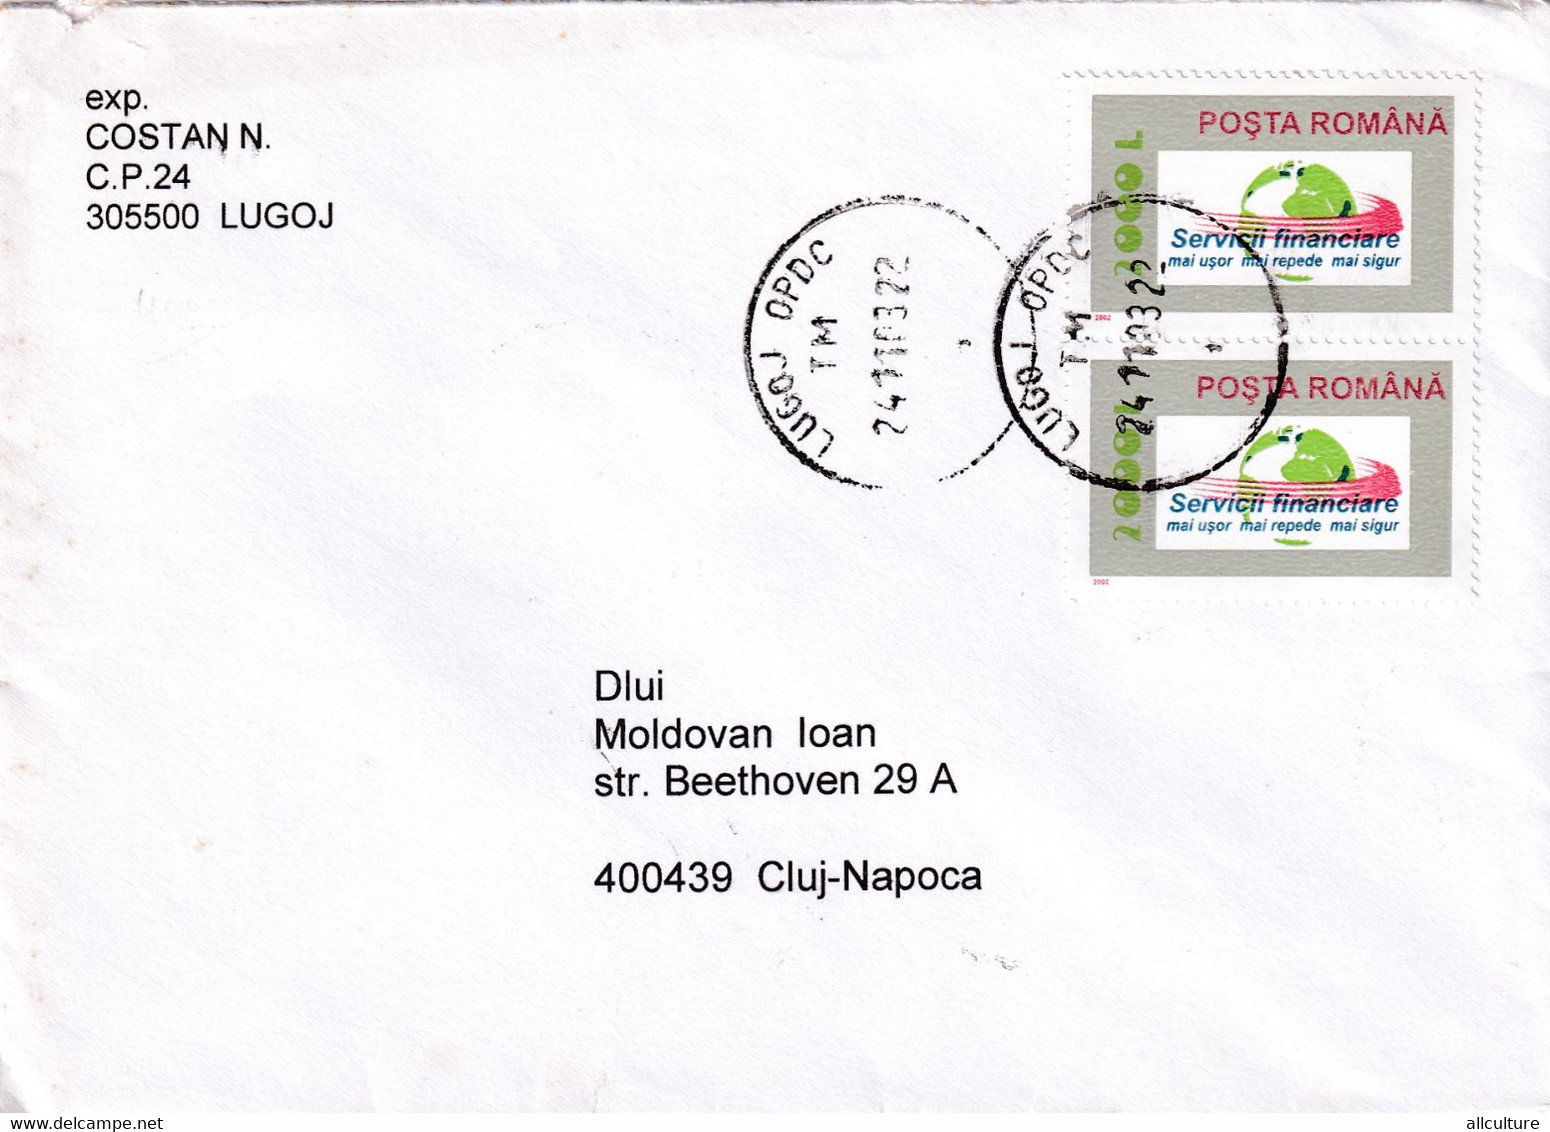 A9424-  LETTER FROM LUGOJ 2003 ROMANIA USED STAMP ON COVER ROMANIAN POSTAGE SENT TO CLUJ NAPOCA - Brieven En Documenten